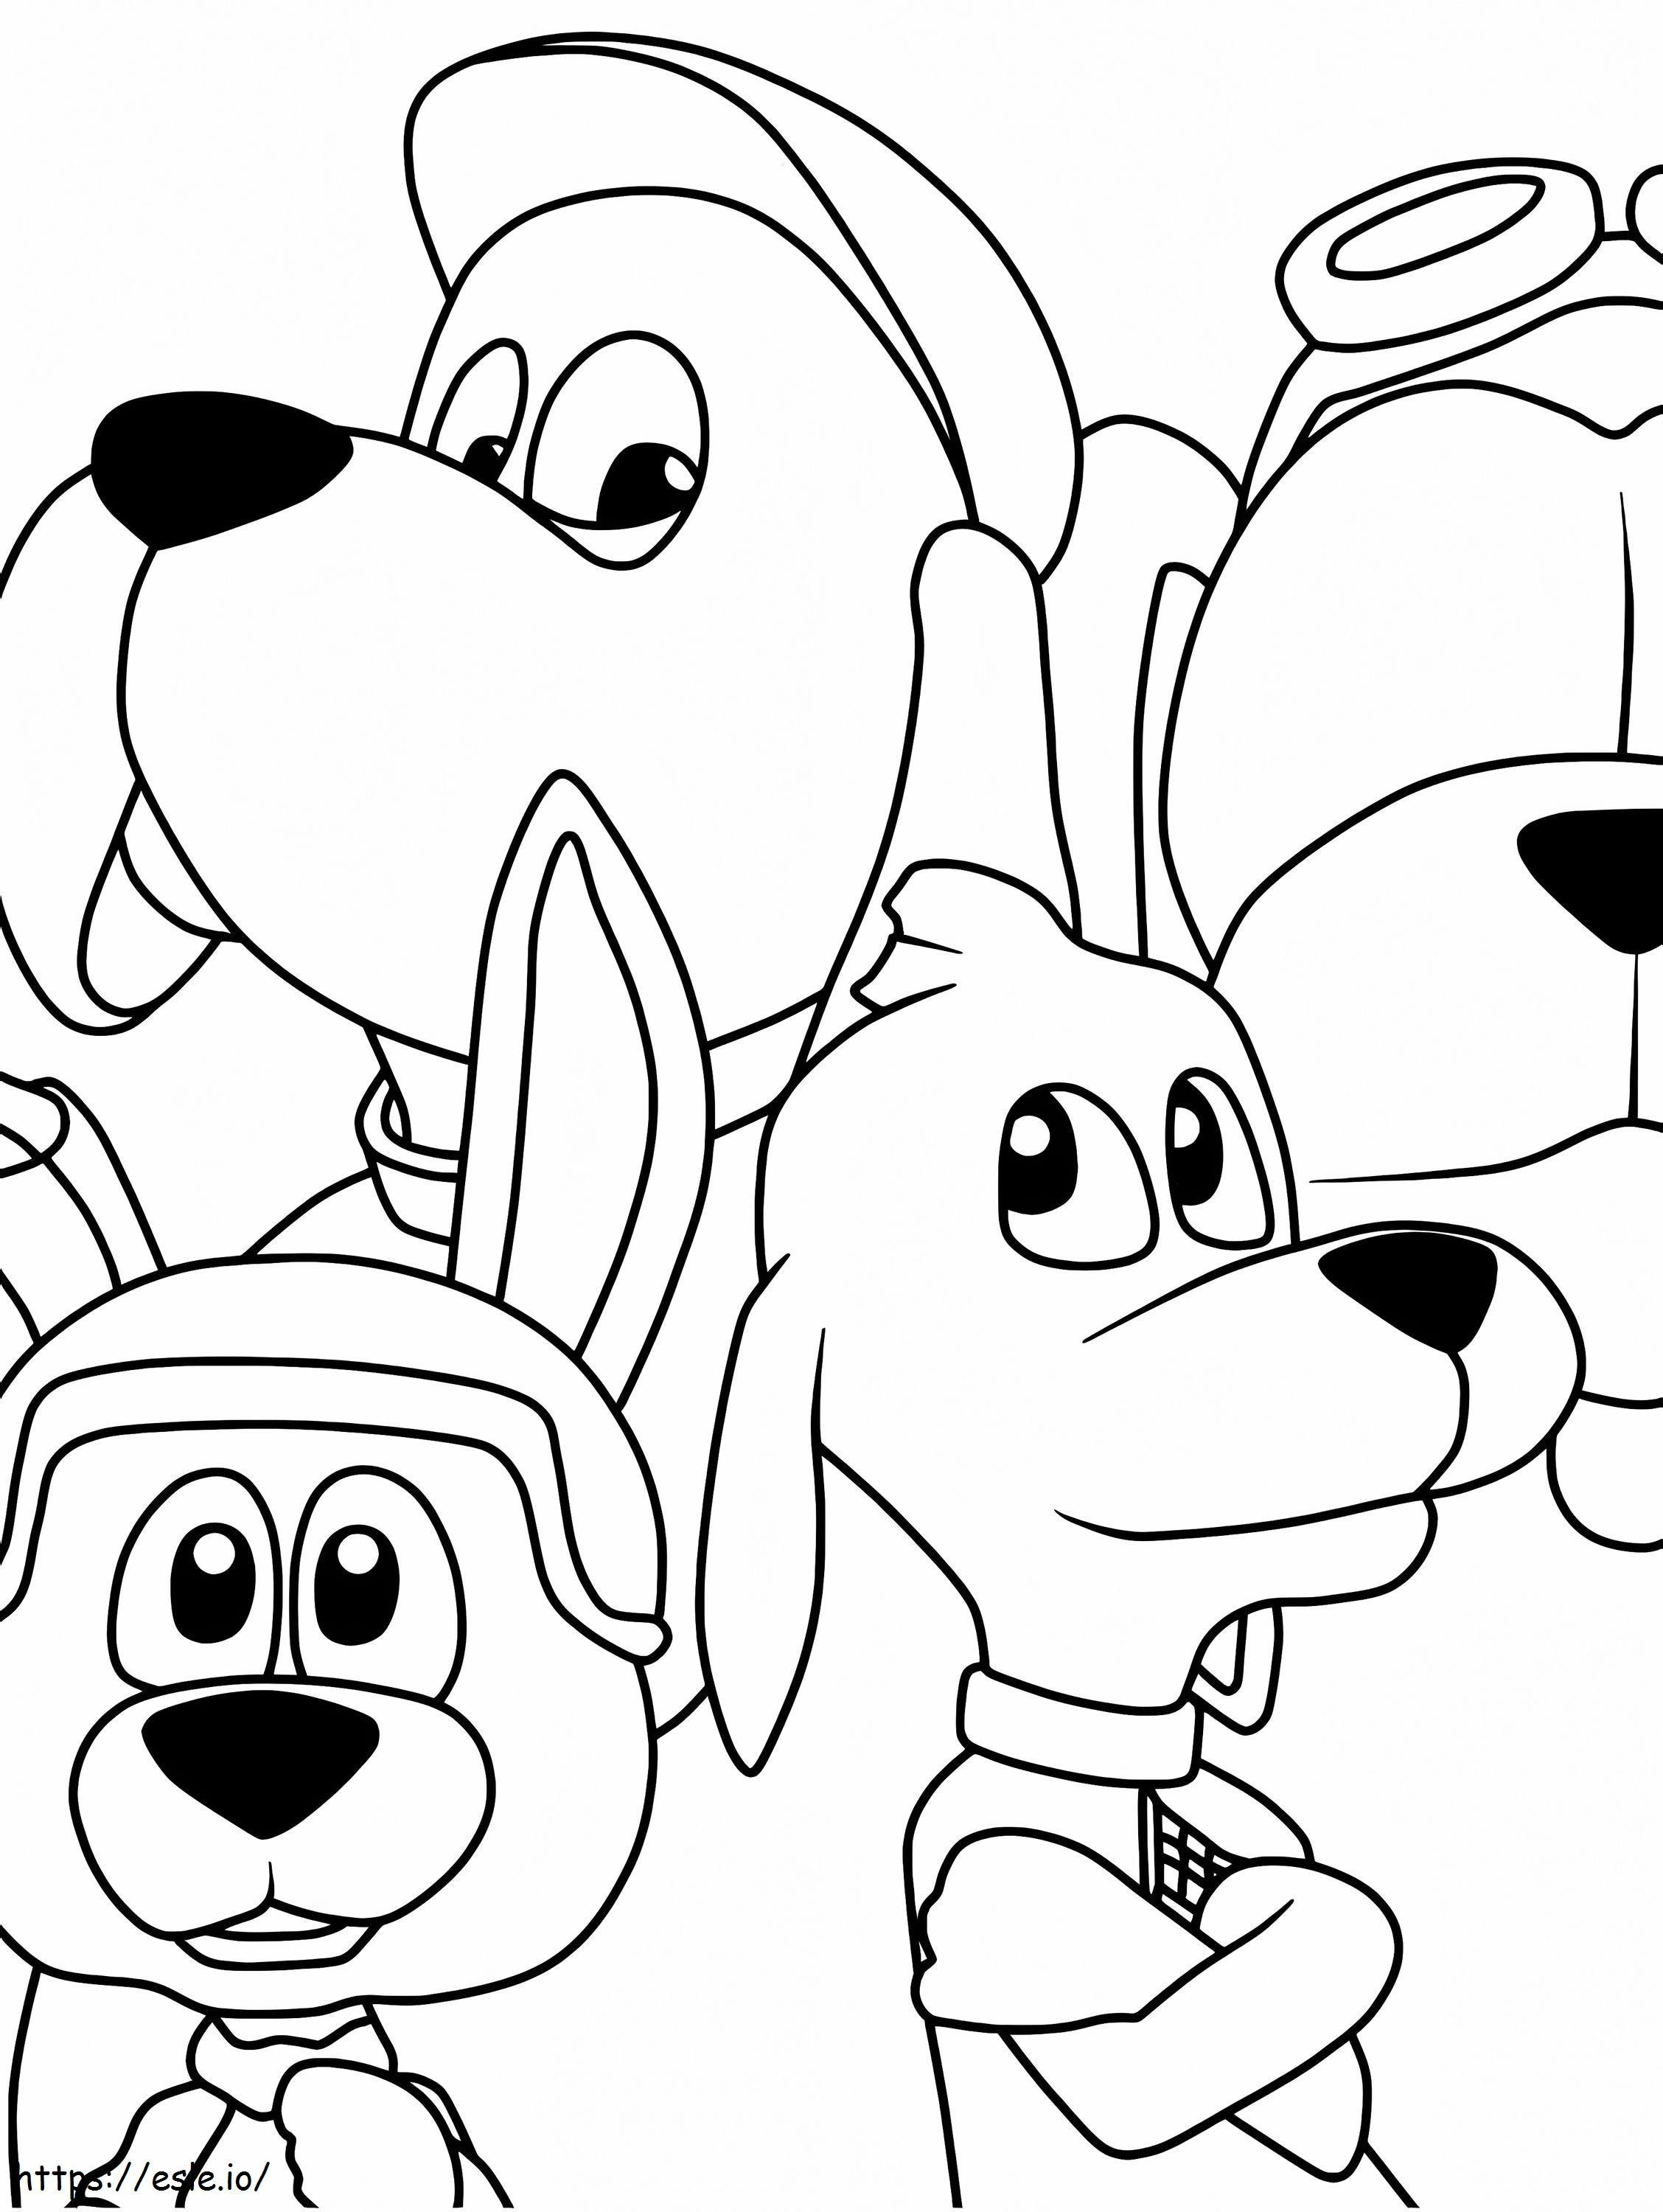 Characters From Go Dog Go coloring page